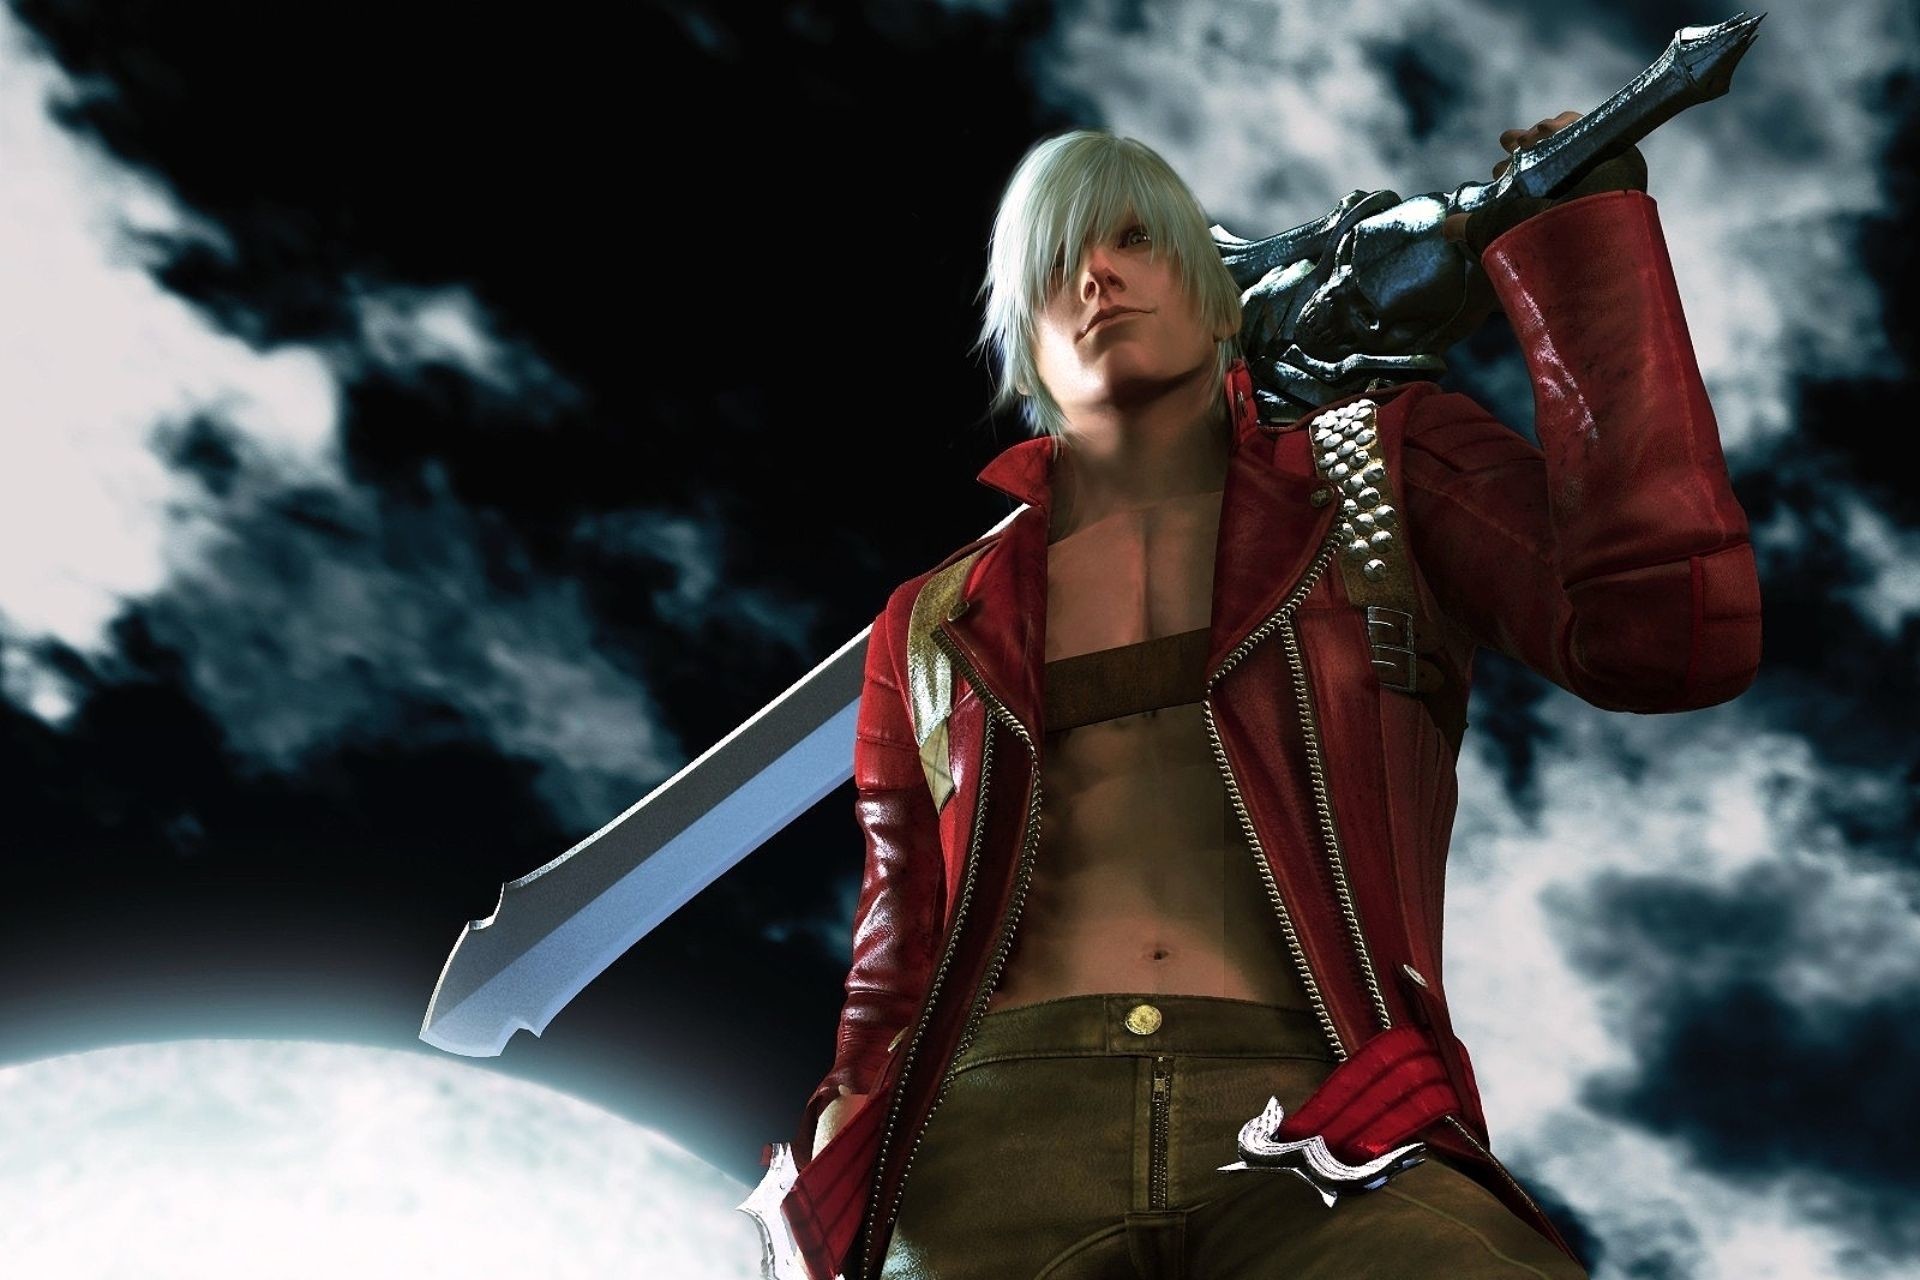 Devil May Cry Wallpaper Image